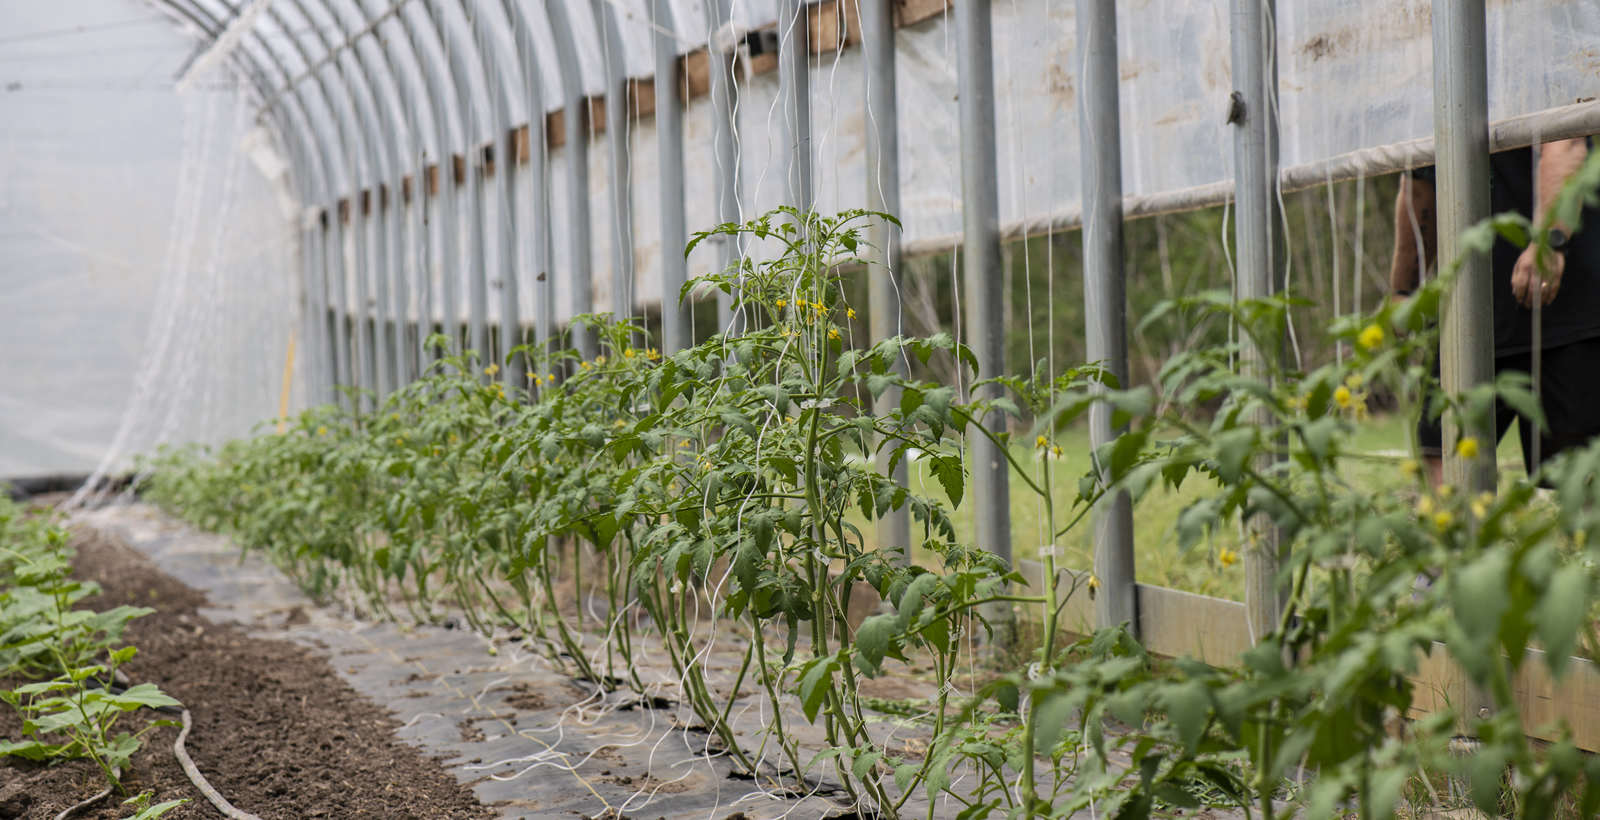 Tomatoes in a high-tunnel